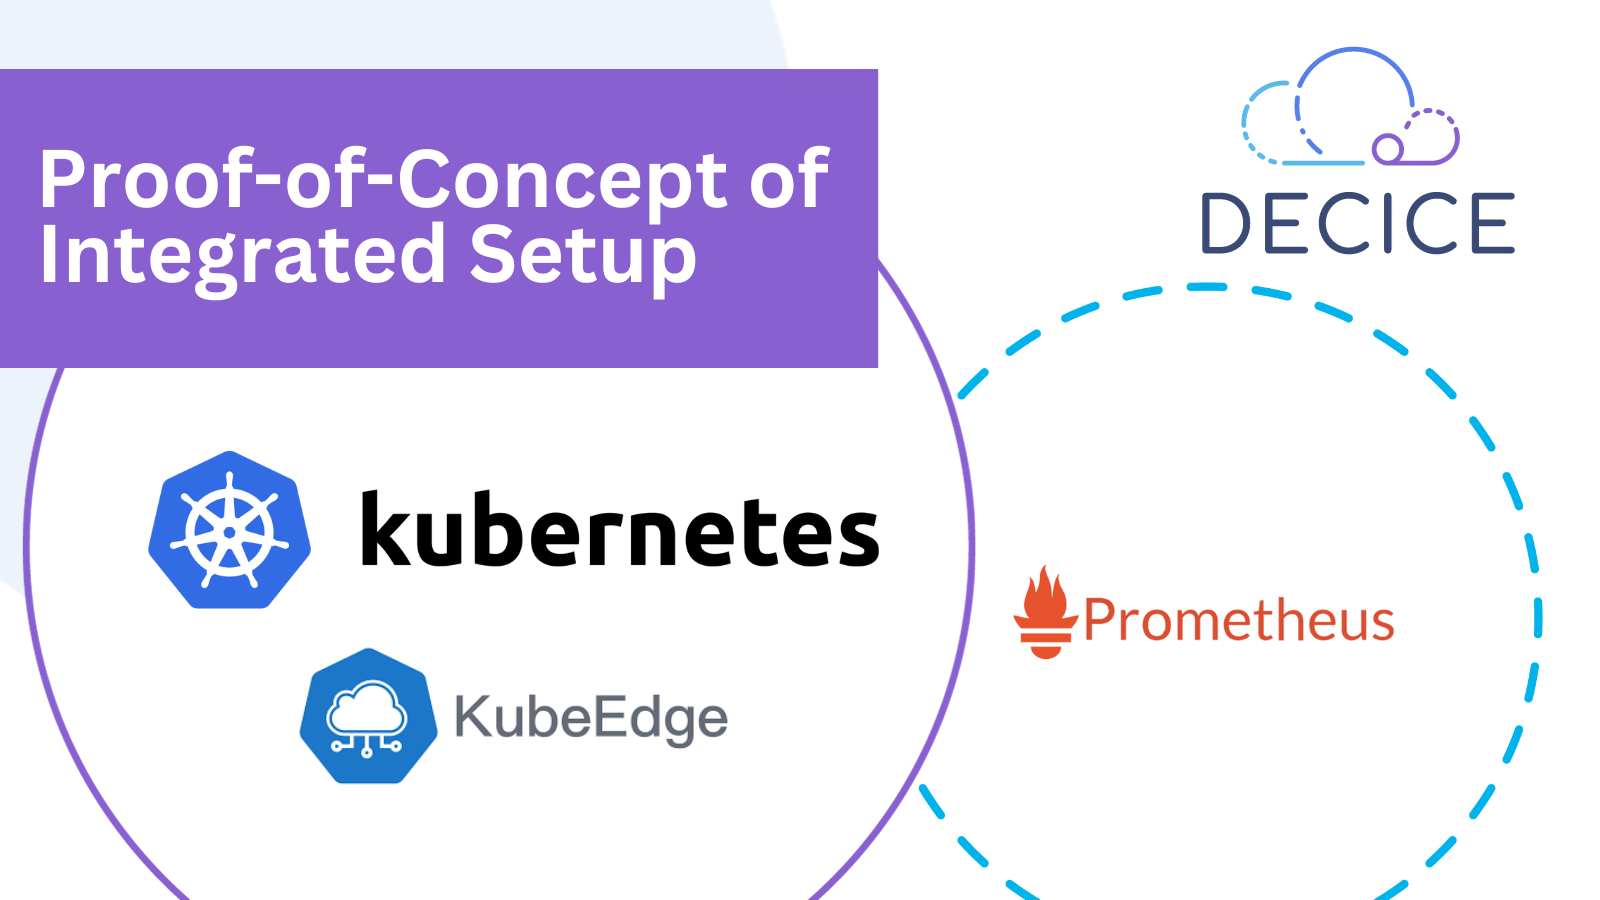 Proof-of-Concept of Integrated Setup: Monitoring, Scheduling and Kubernetes/KubeEdge